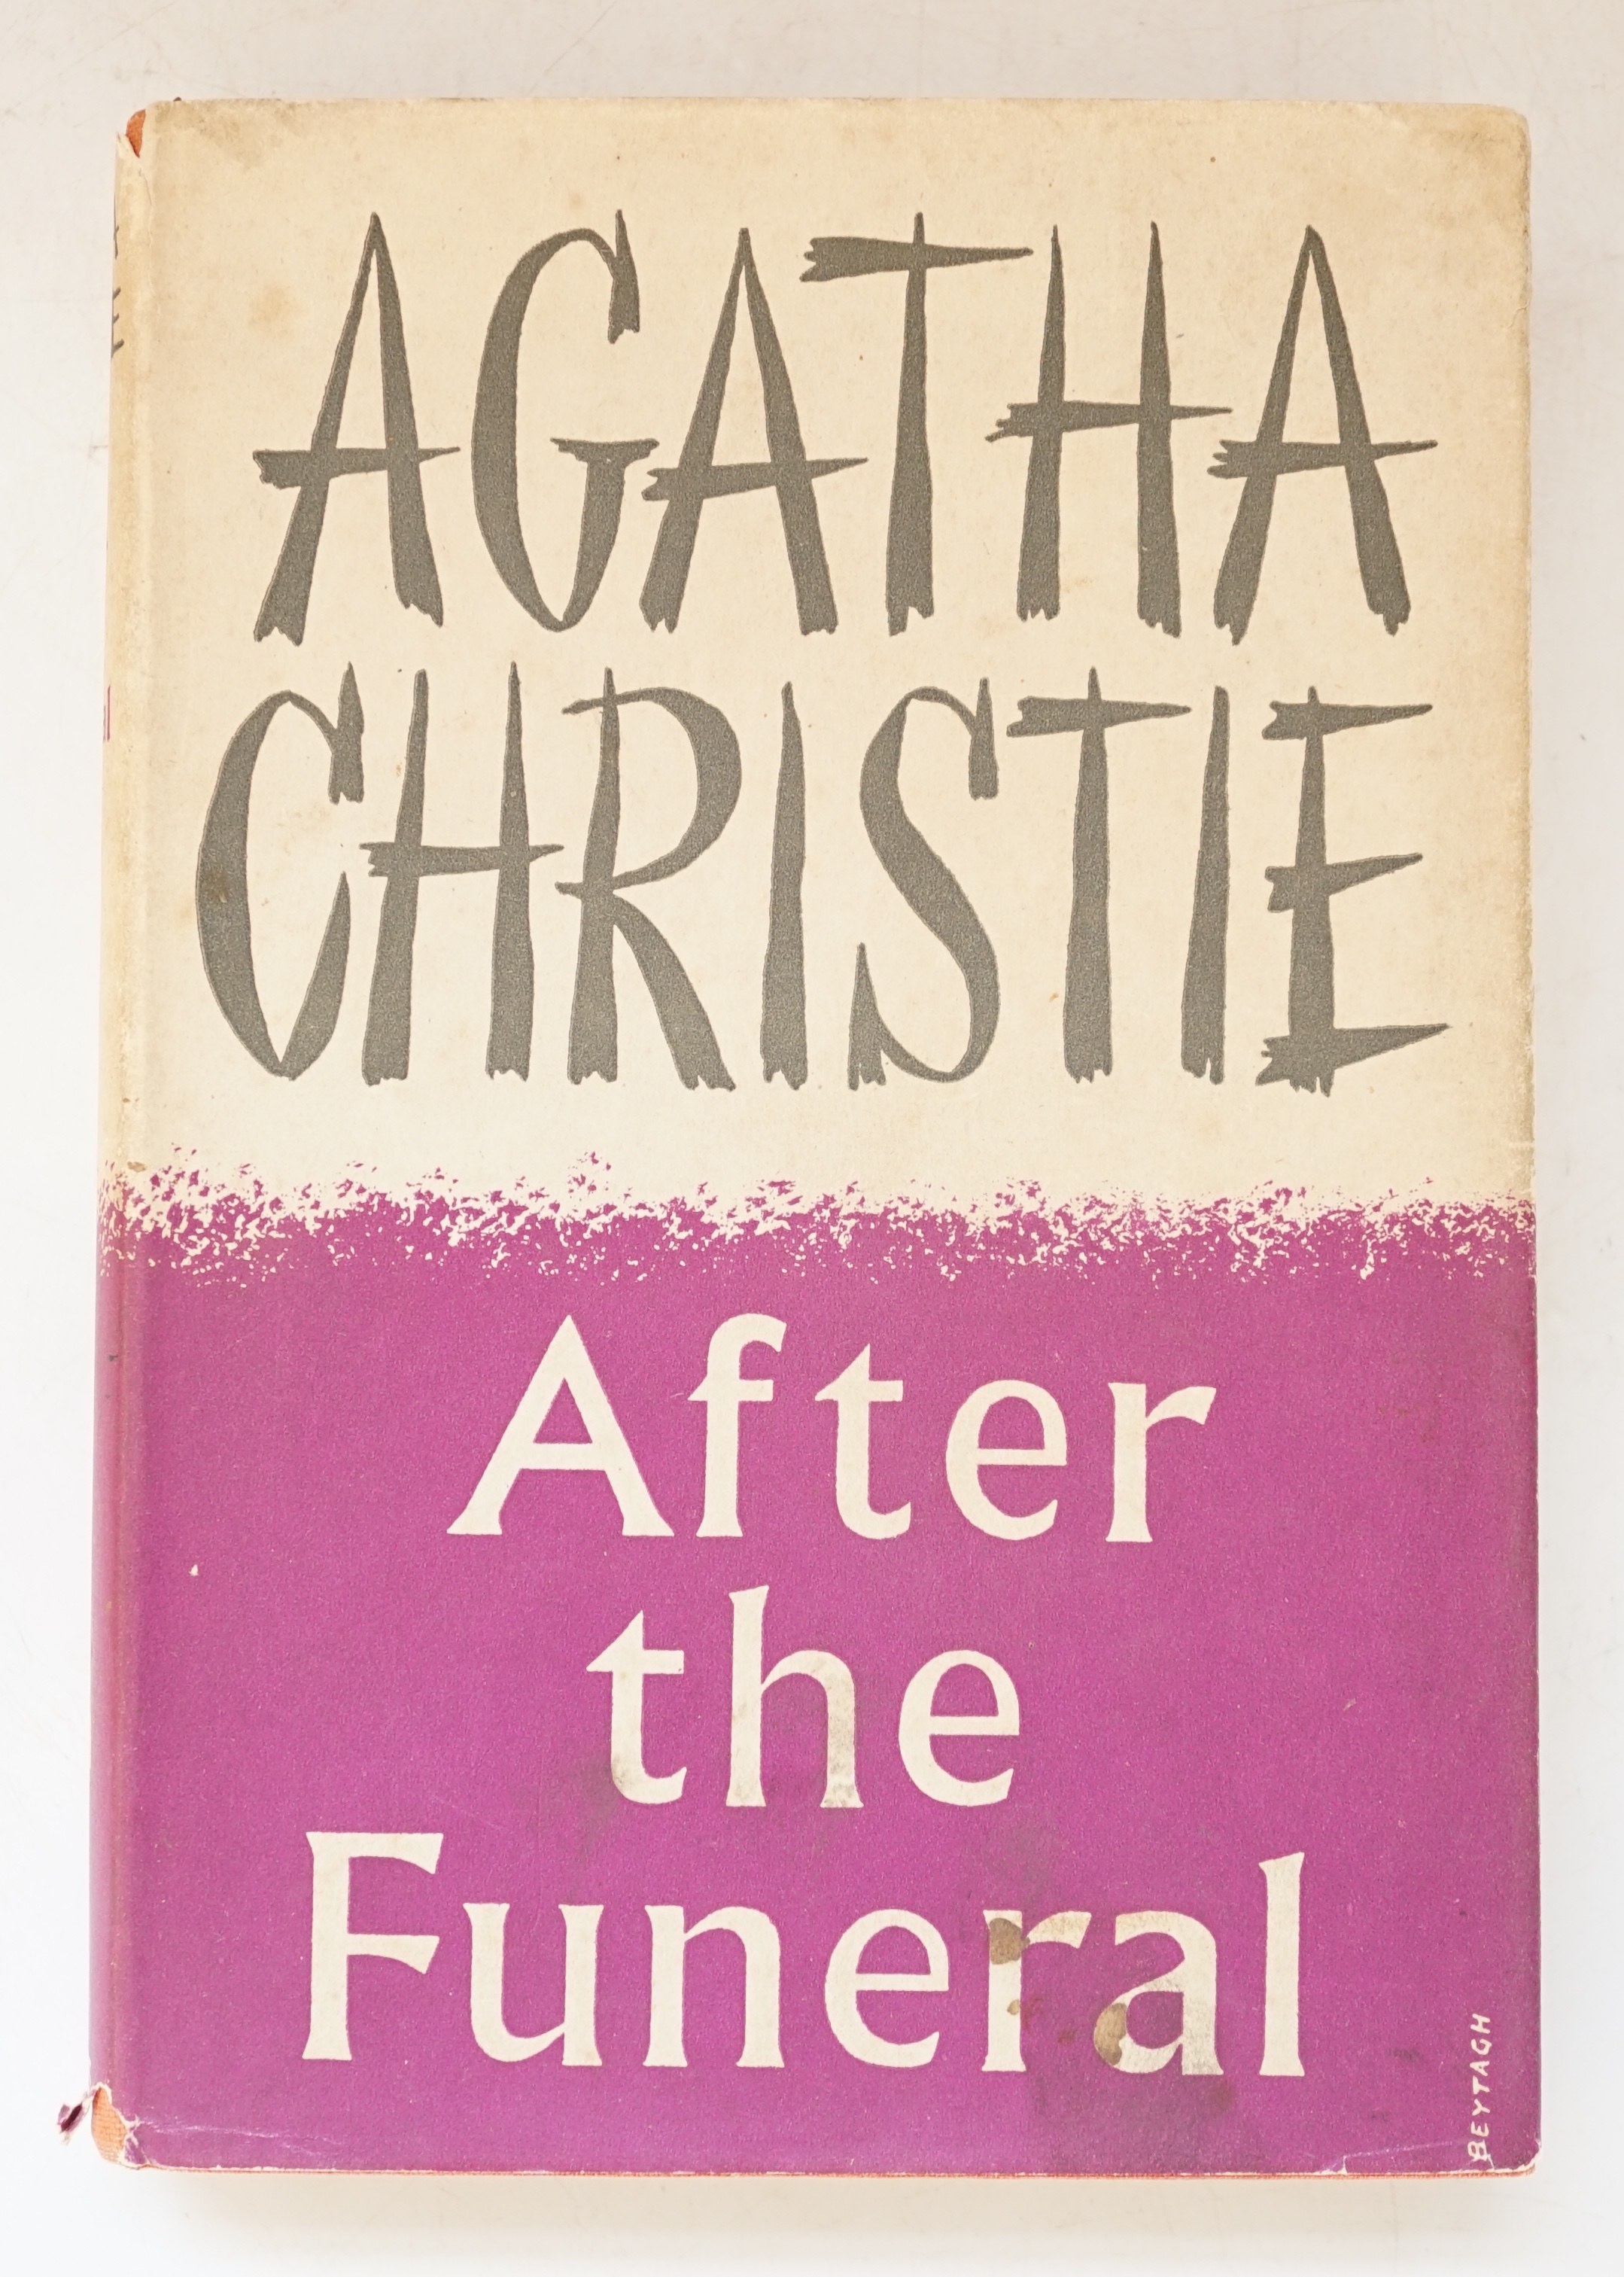 Christie, Agatha - After the Funeral, 1st edition, cloth, in unclipped d/j, Collins, for The Crime Club, London, 1953